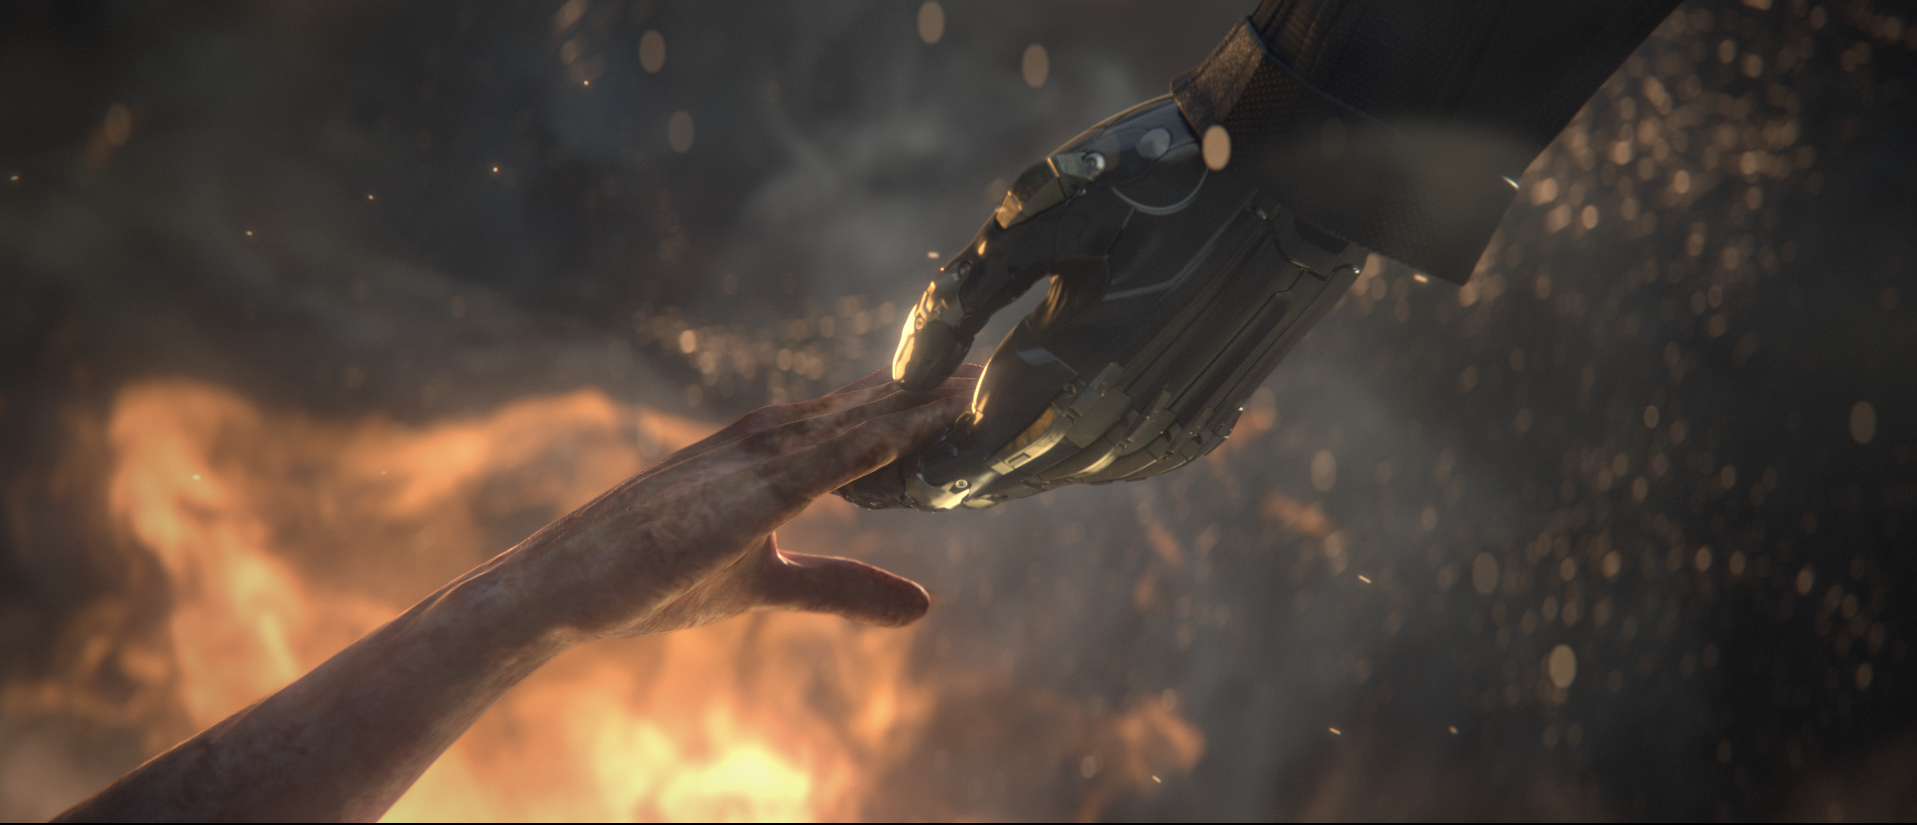 Deus Ex Mankind Divided Screenshot Showing a Cyborg Hand Holding a Human Hand in Front of Molten Fire